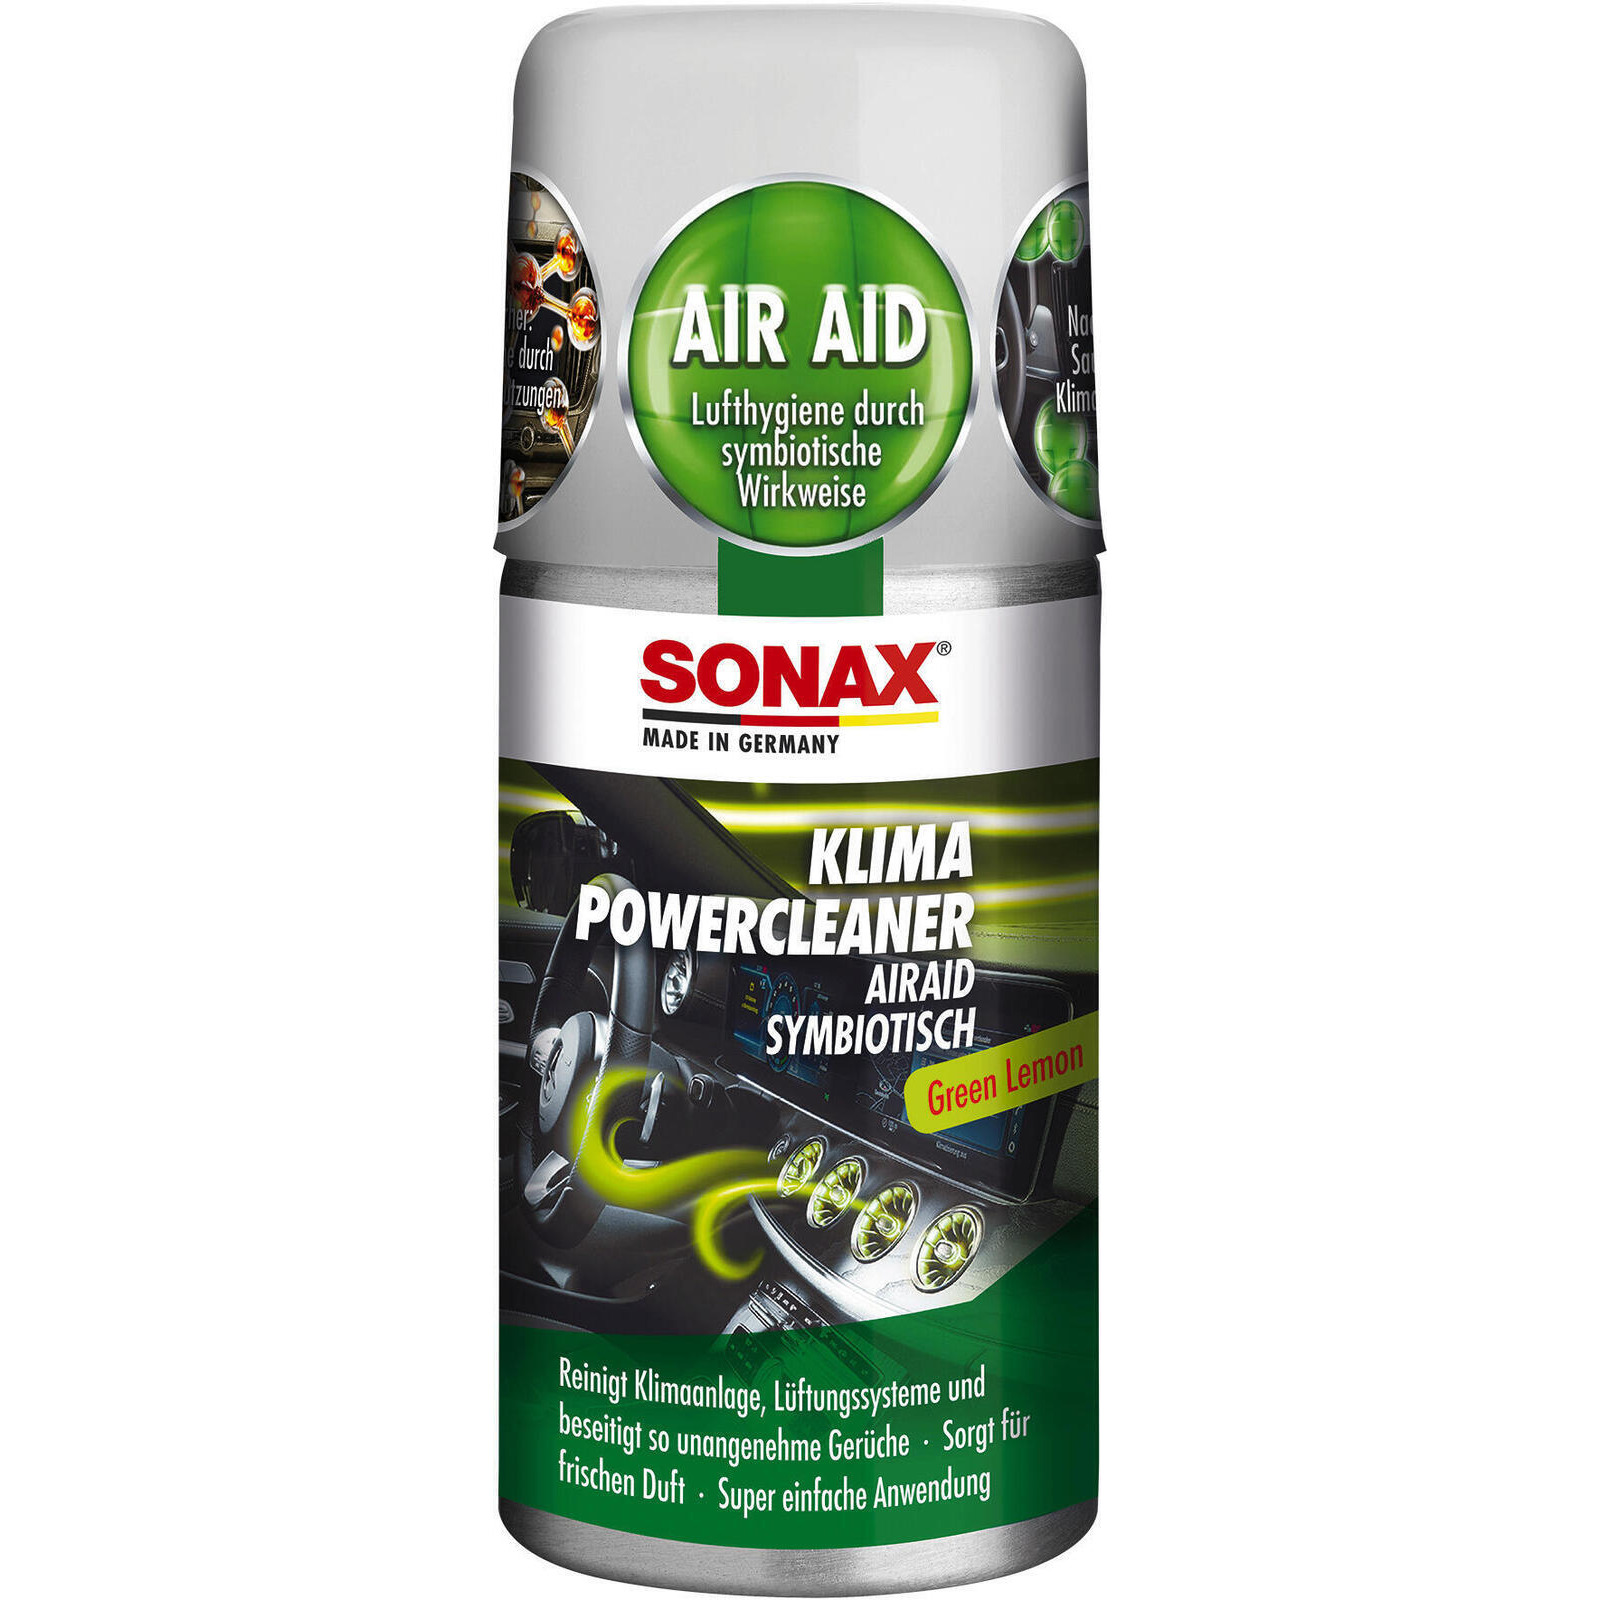 SONAX Air Conditioning Cleaner/-Disinfecter Car A/C cleaner anti-bacterial Green Lemon